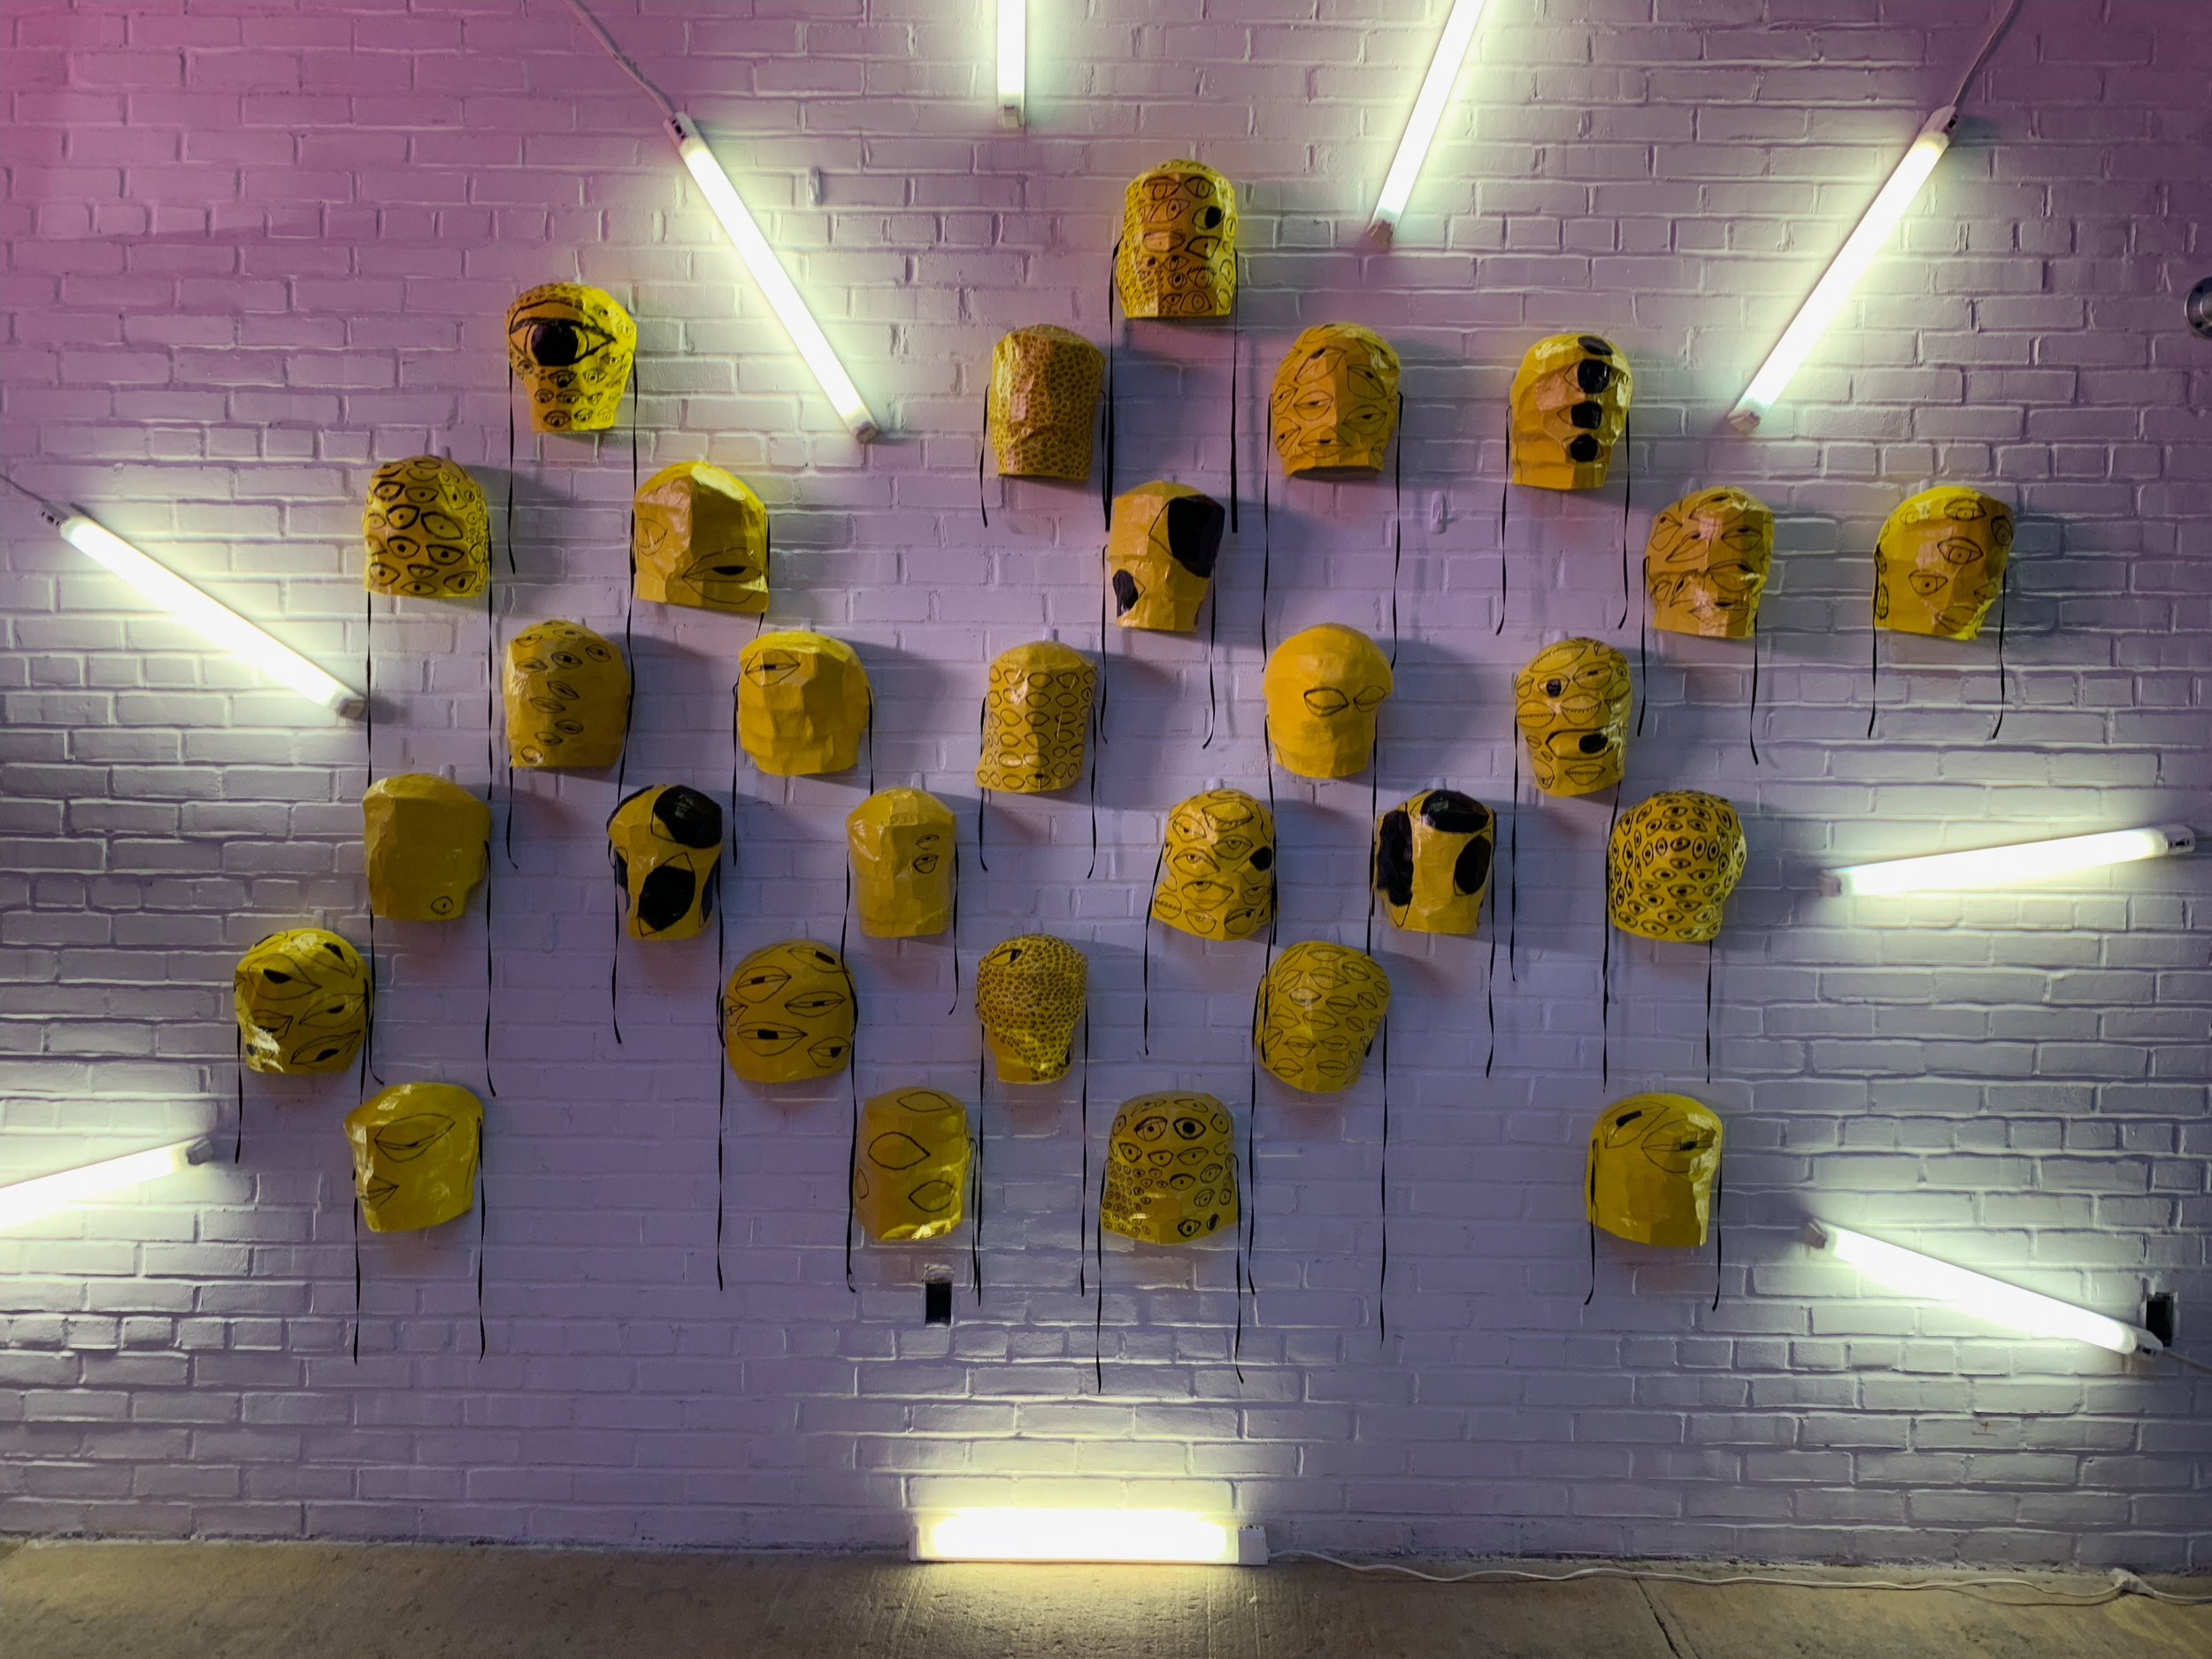 Thirty-two yellow papier-mache masks with black eyes drawn on them are hung on a white brick wall. They are lit by fluorescent lights radiating around them. Photo by Yanira Castro.